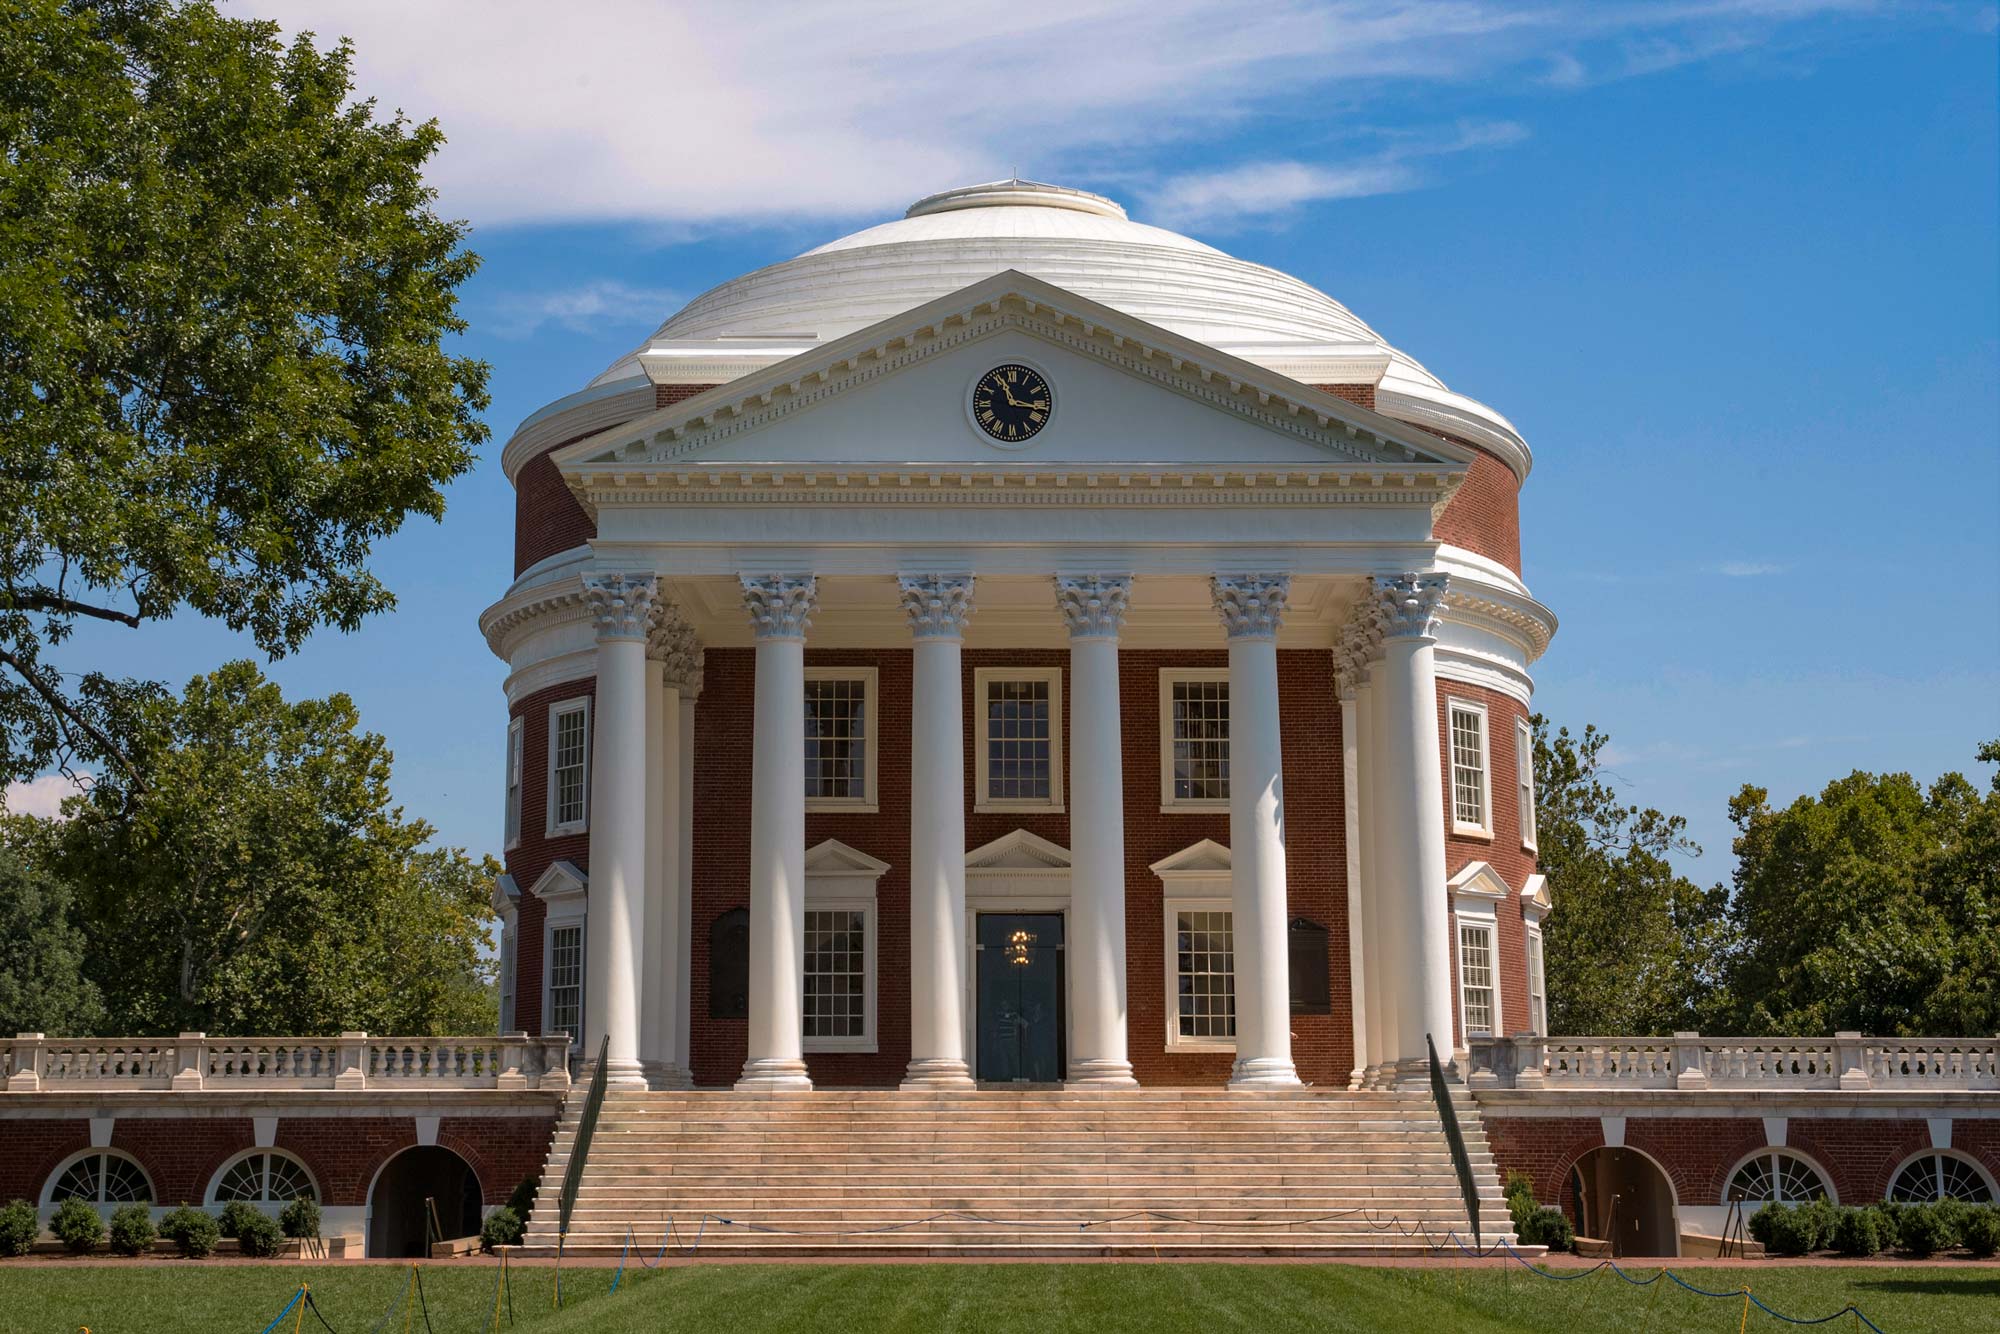 UVA Announces That All Students, Regardless of Citizenship Status, Are Eligible to Enroll